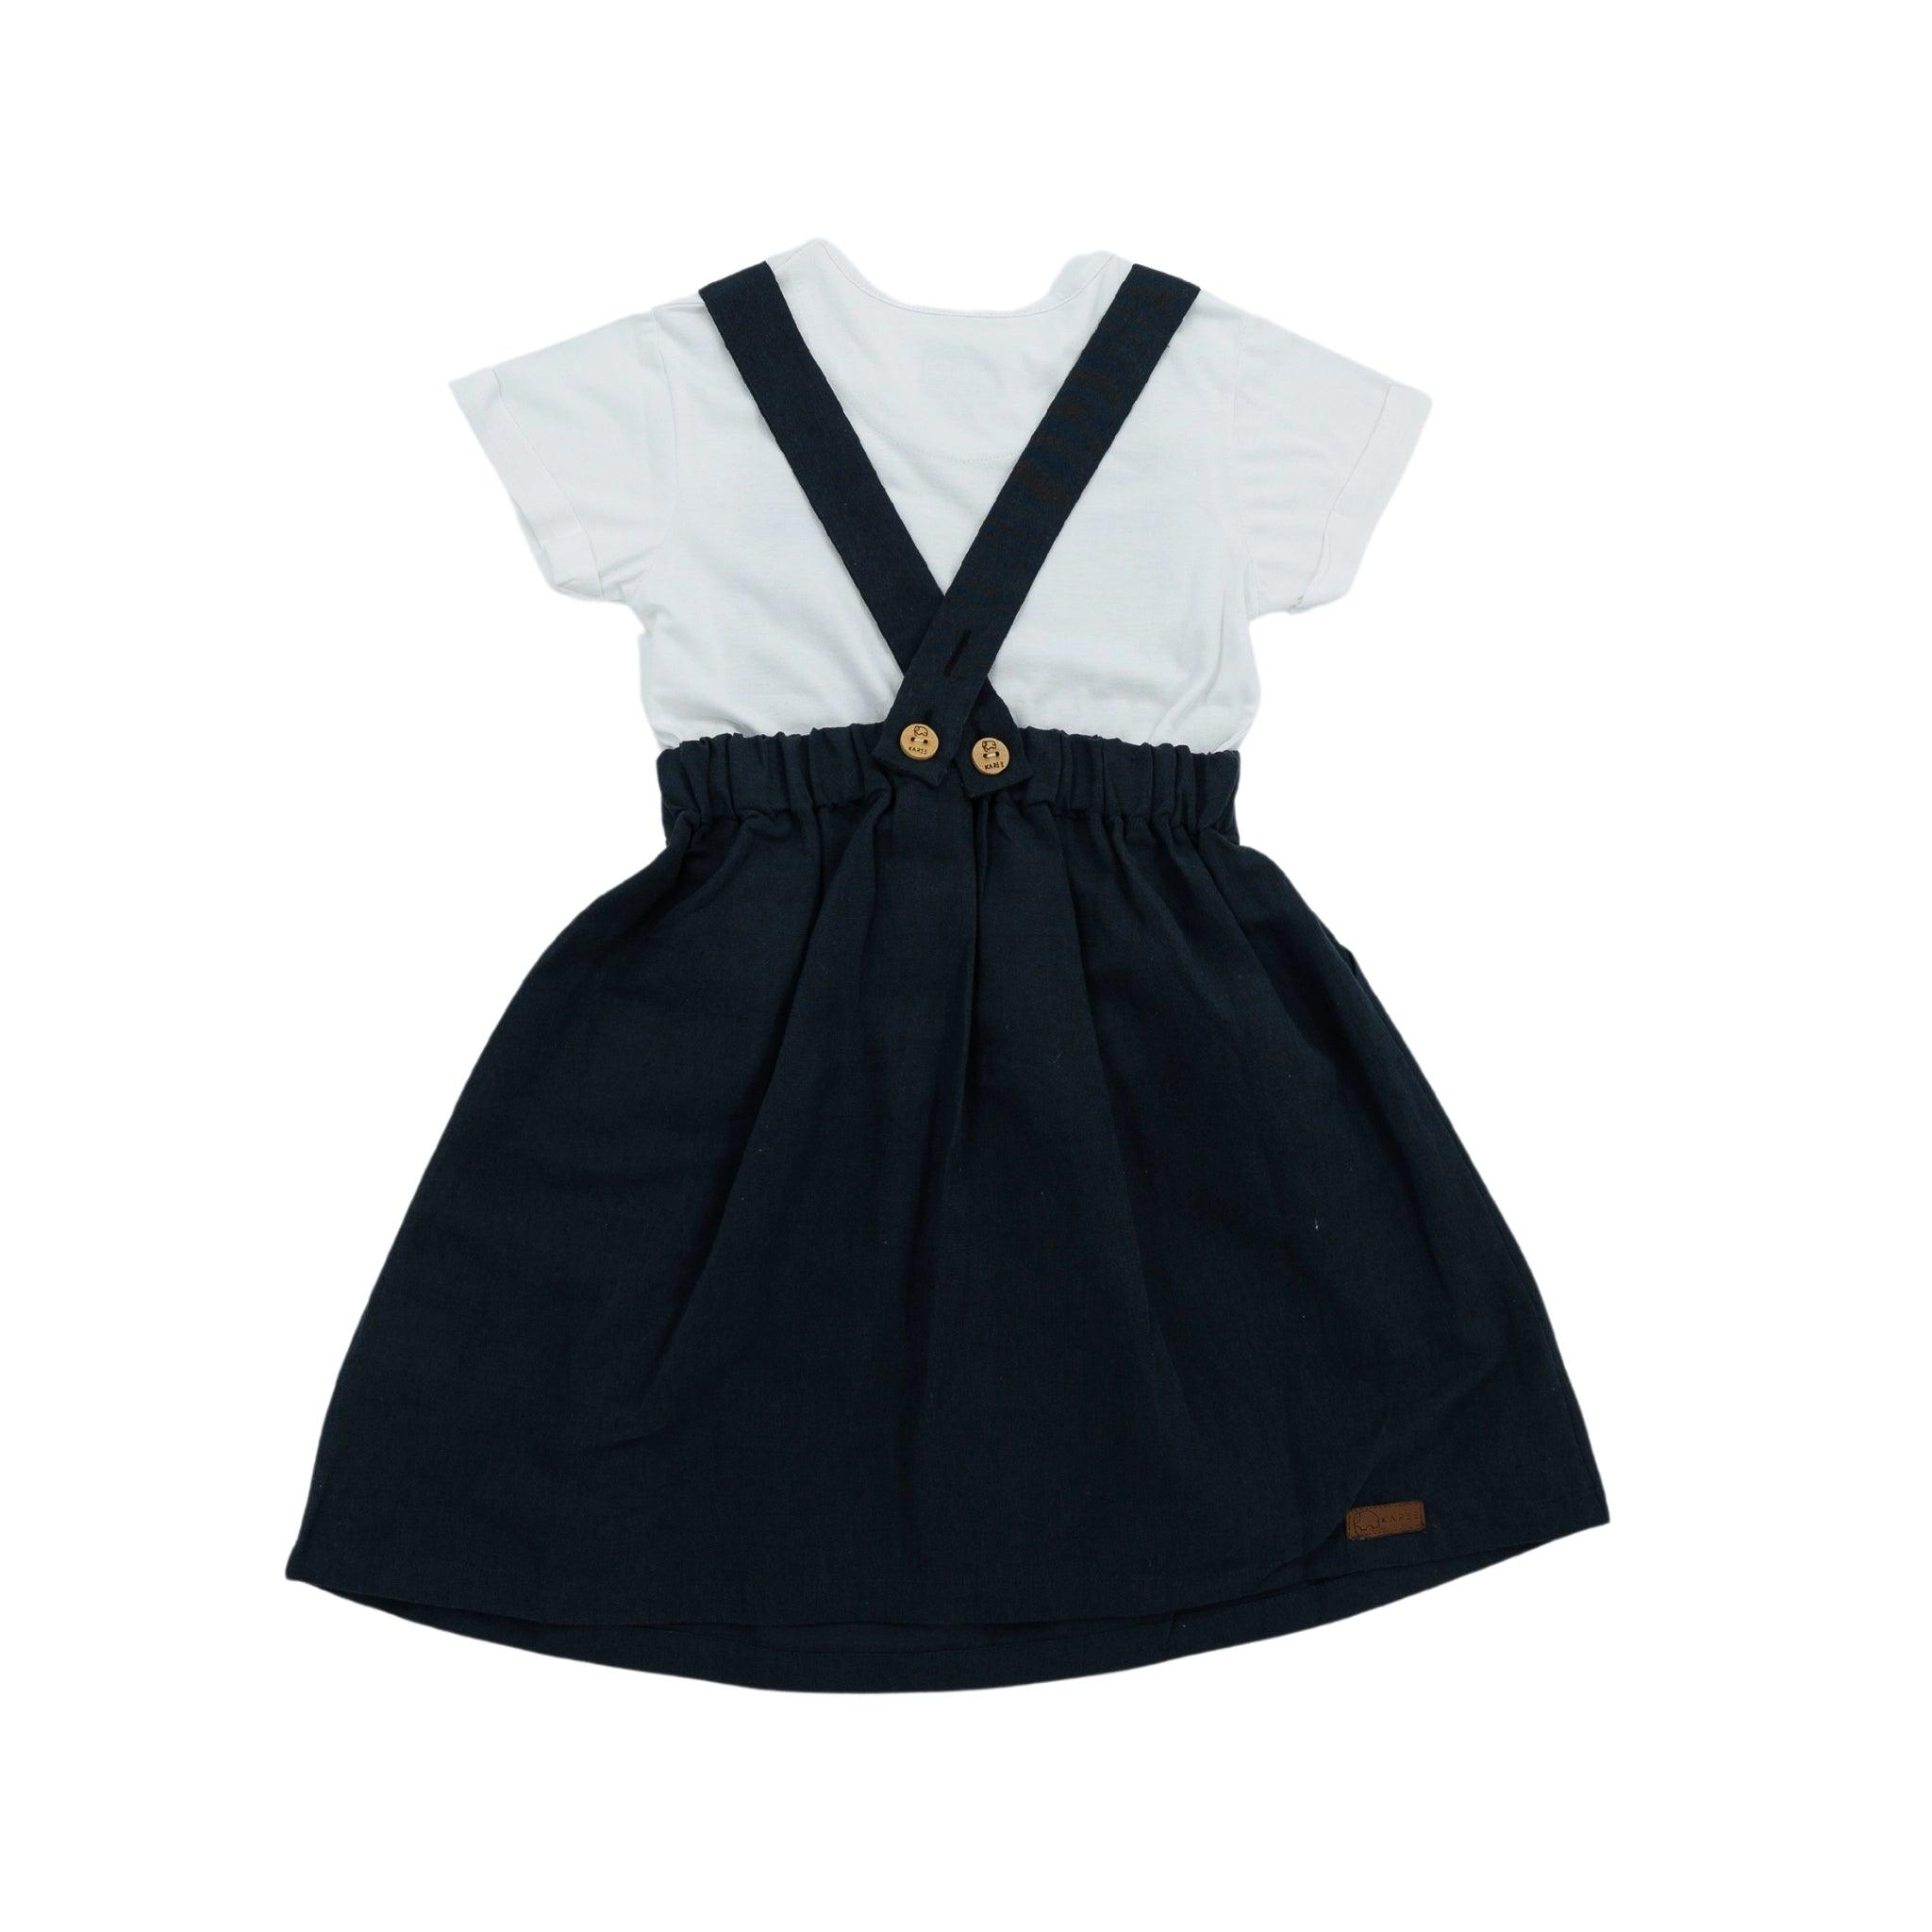 White t-shirt with a Karee Ebony Black Linen Pinafore for Girls, featuring button details, isolated on a white background.